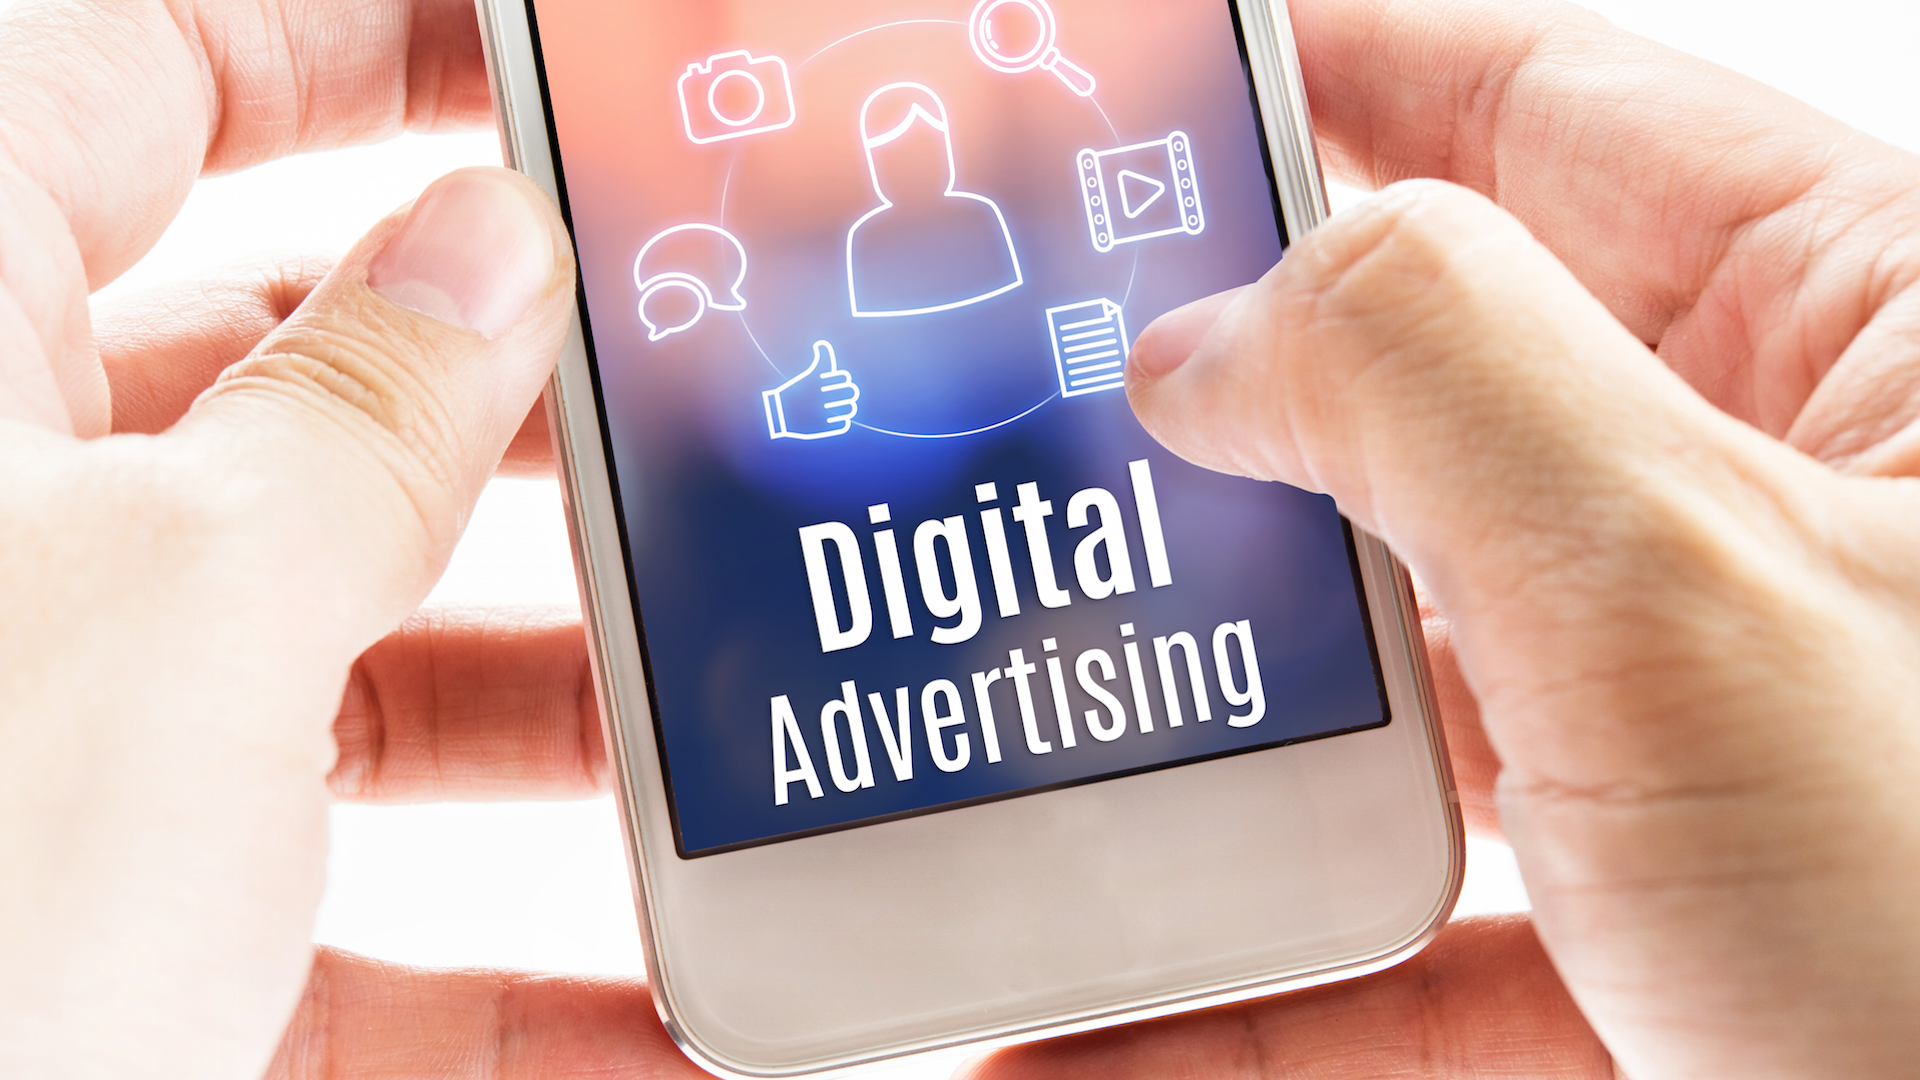 Mobile advertising to pass the $100 billion mark for the first time